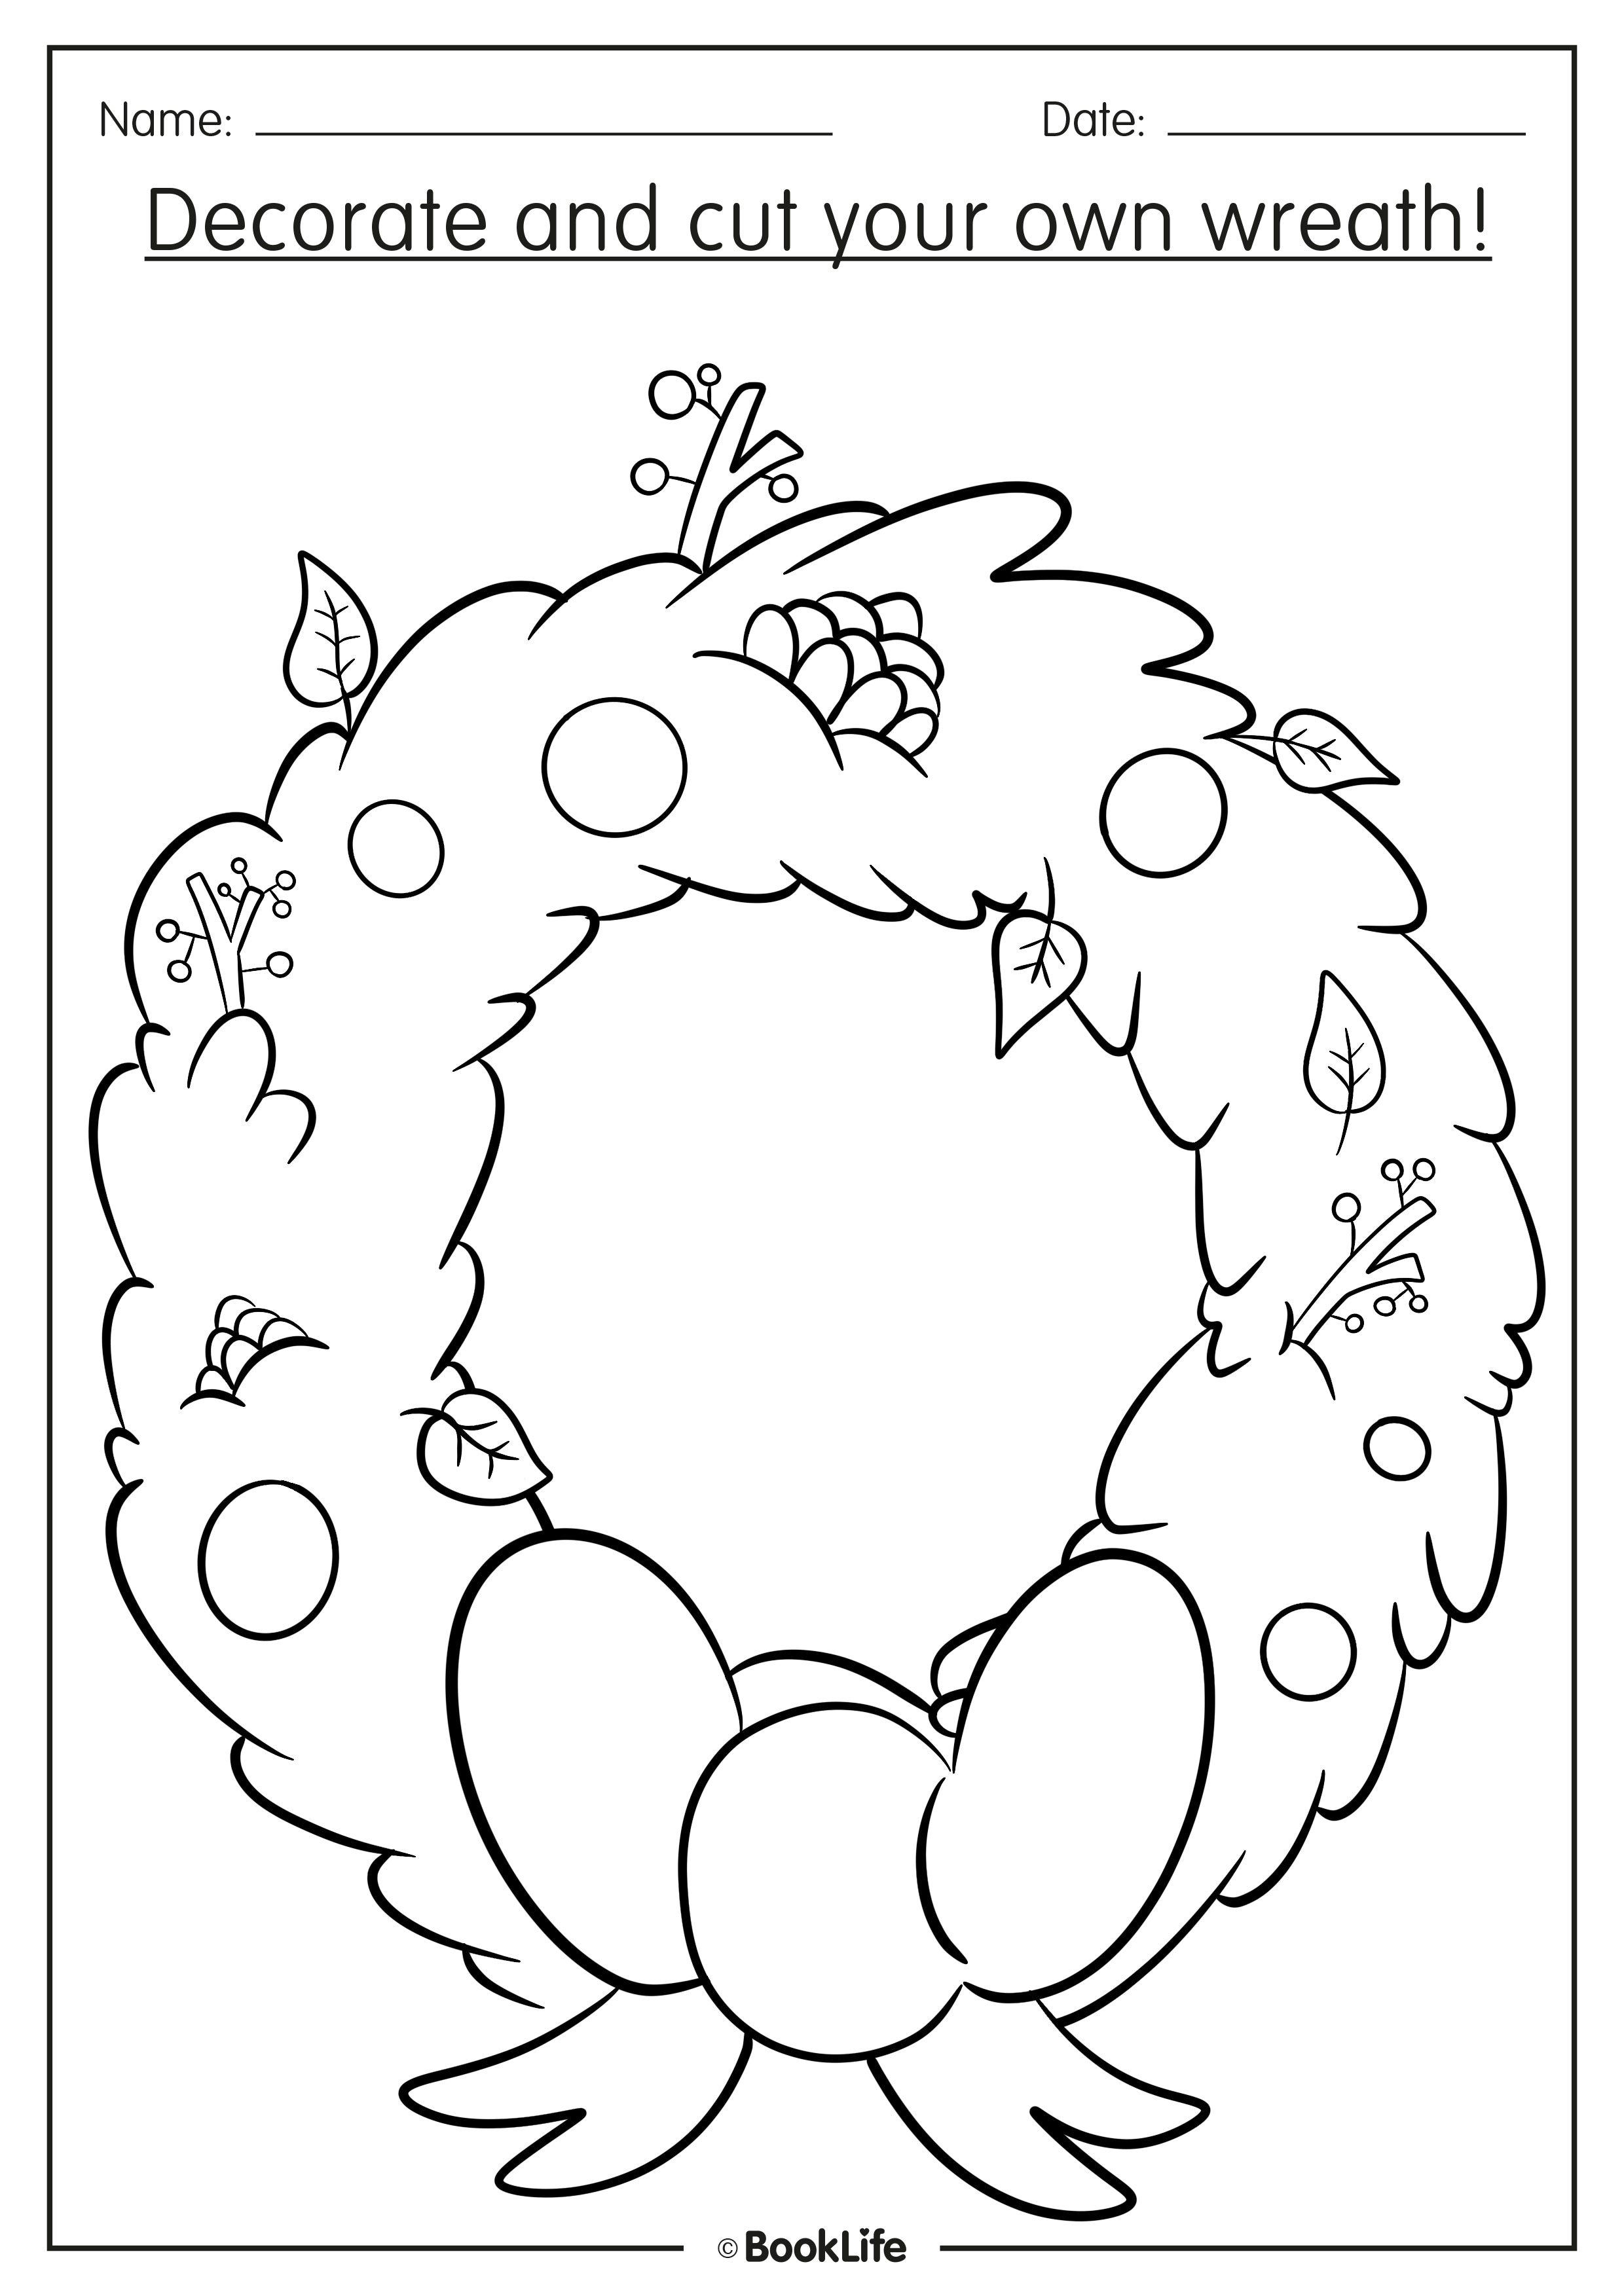 Reef Colouring In Activity Sheet